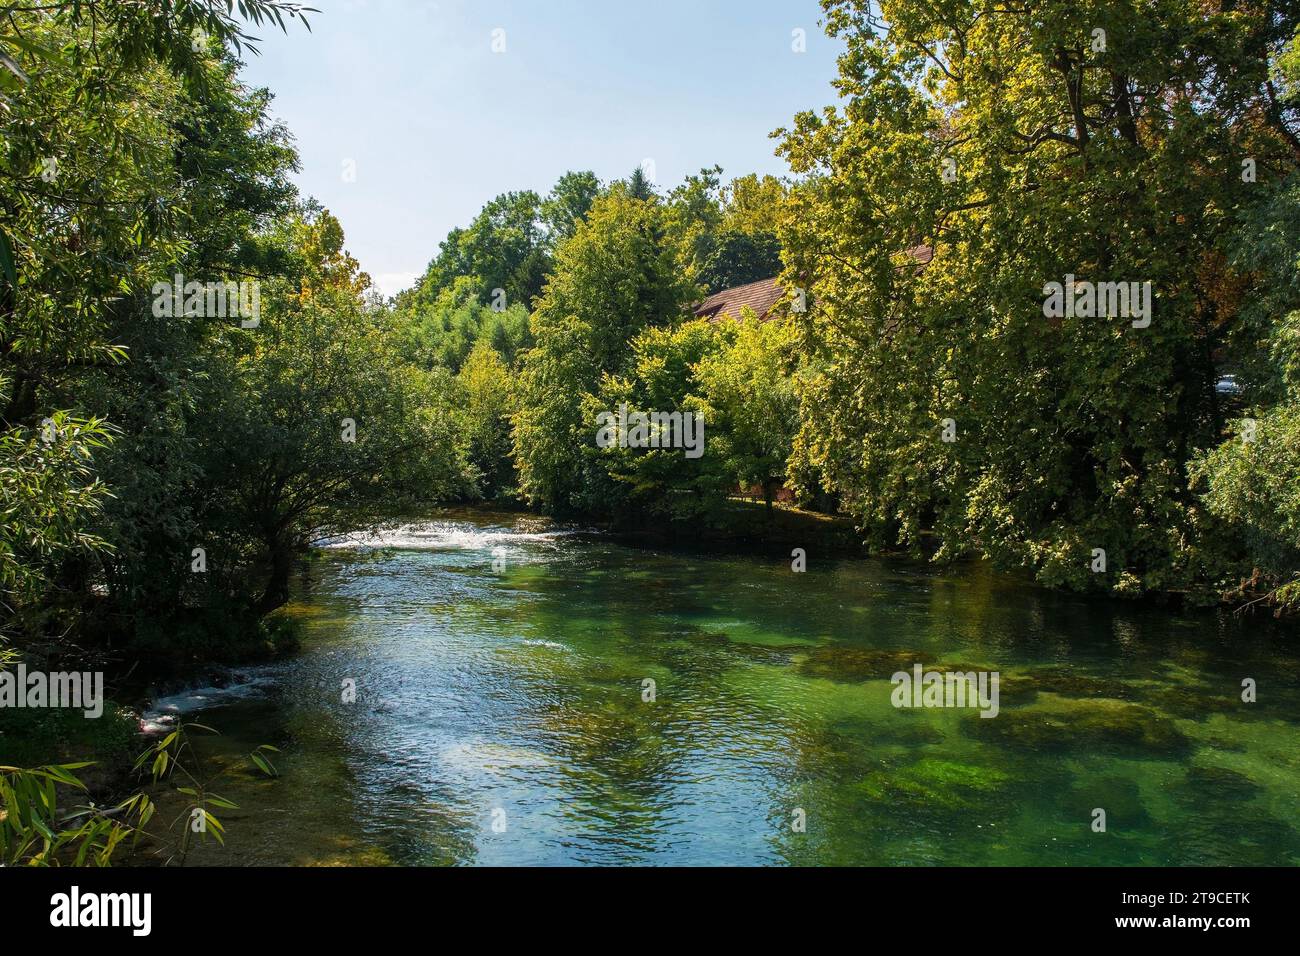 The River Una as it passes through central Bihac in Una-Sana Canton, Federation of Bosnia and Herzegovina Stock Photo